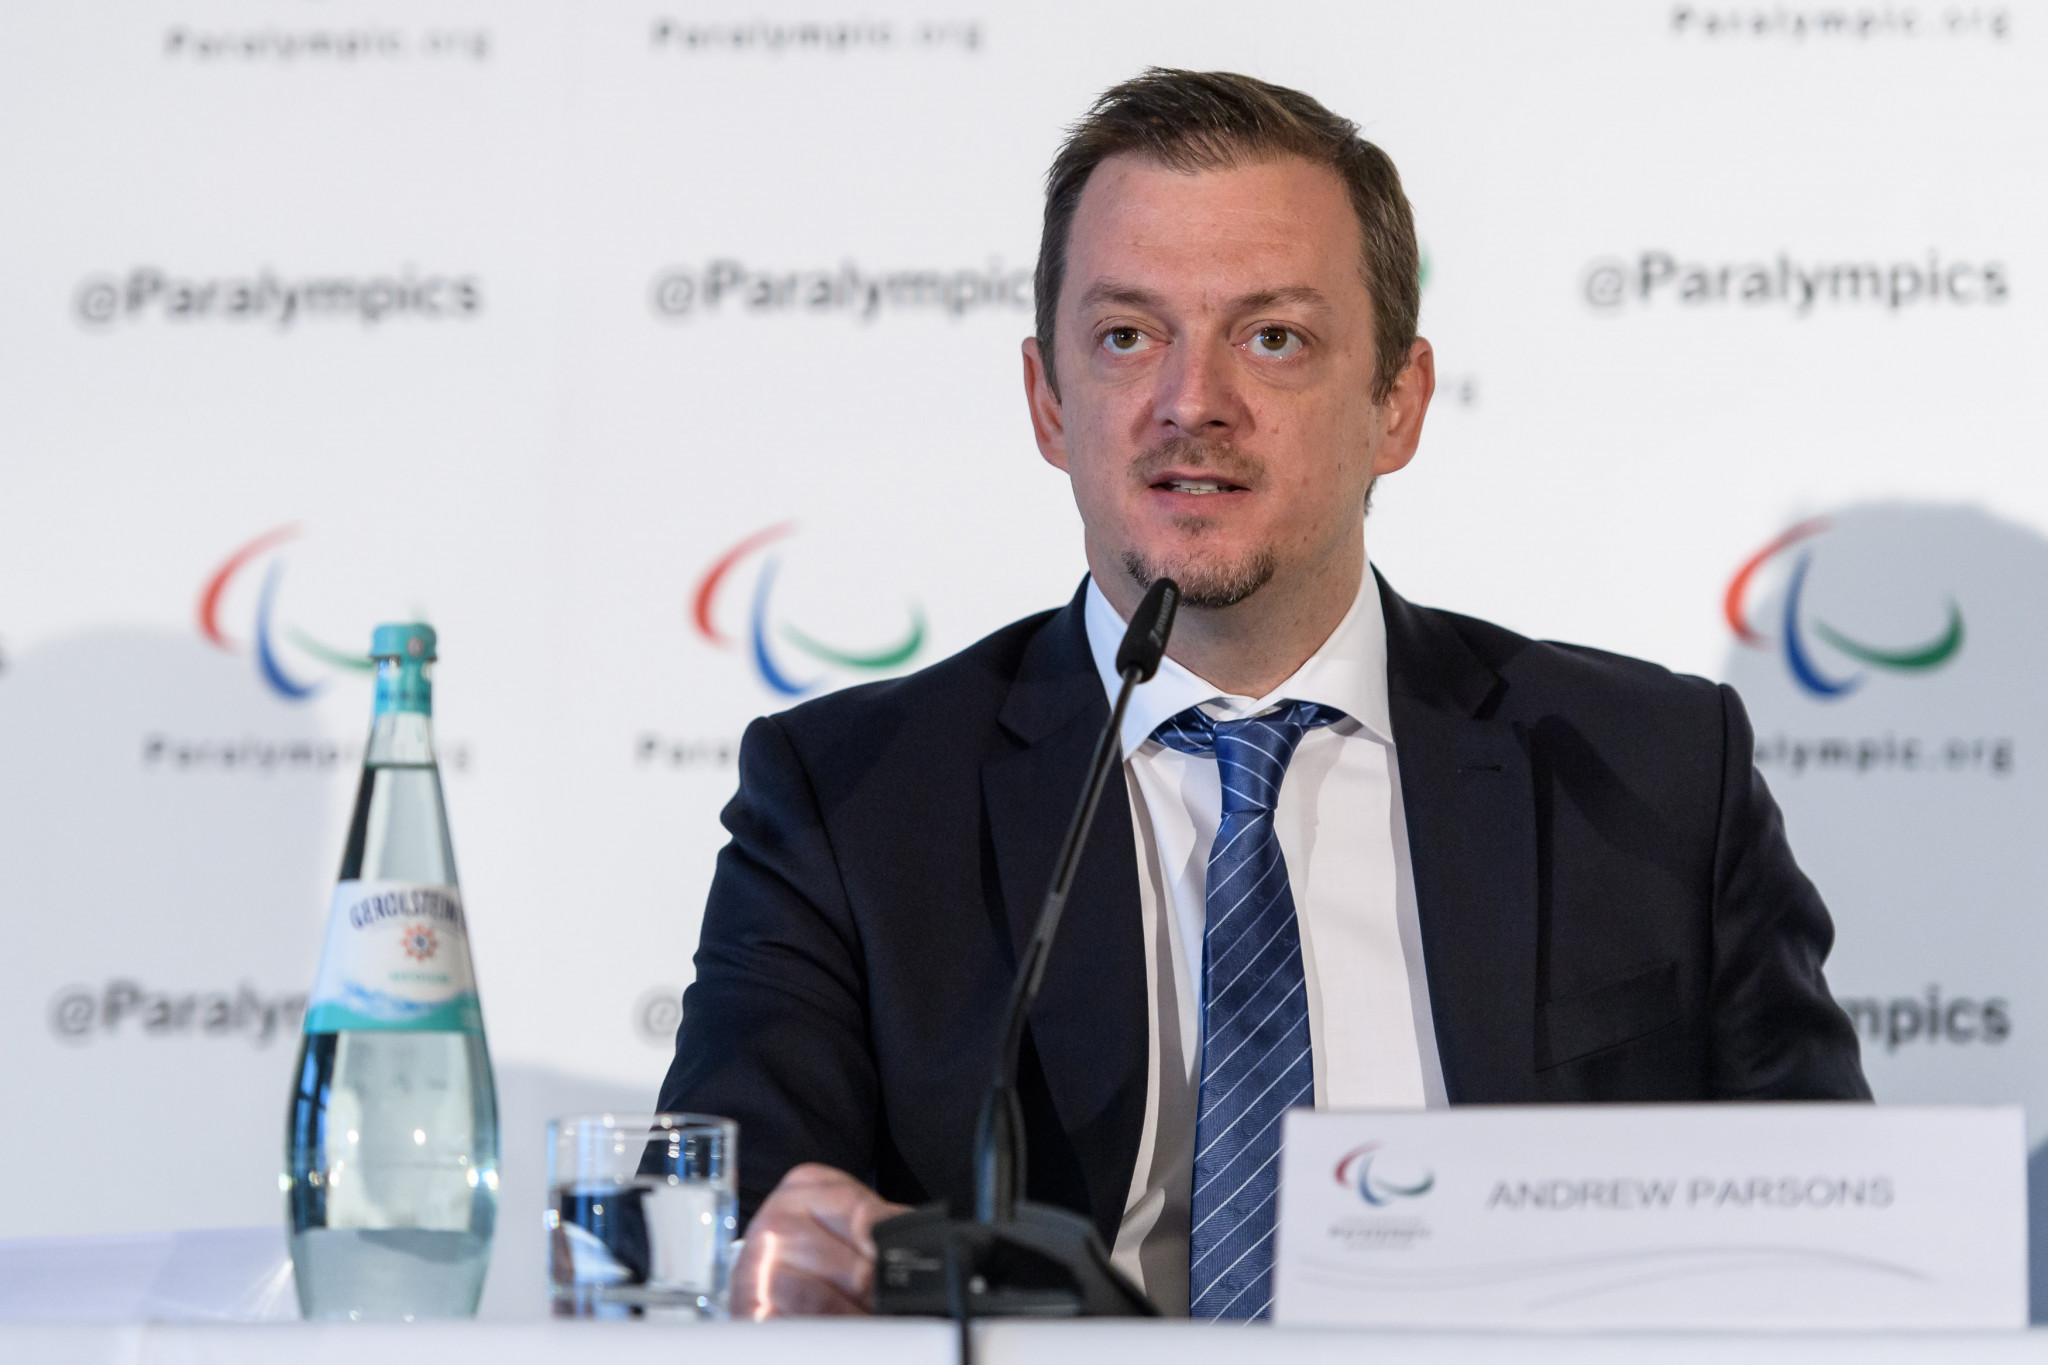 IPC President Andrew Parsons congratulated athletes for attending the APC Athletes' Forum ©Getty Images